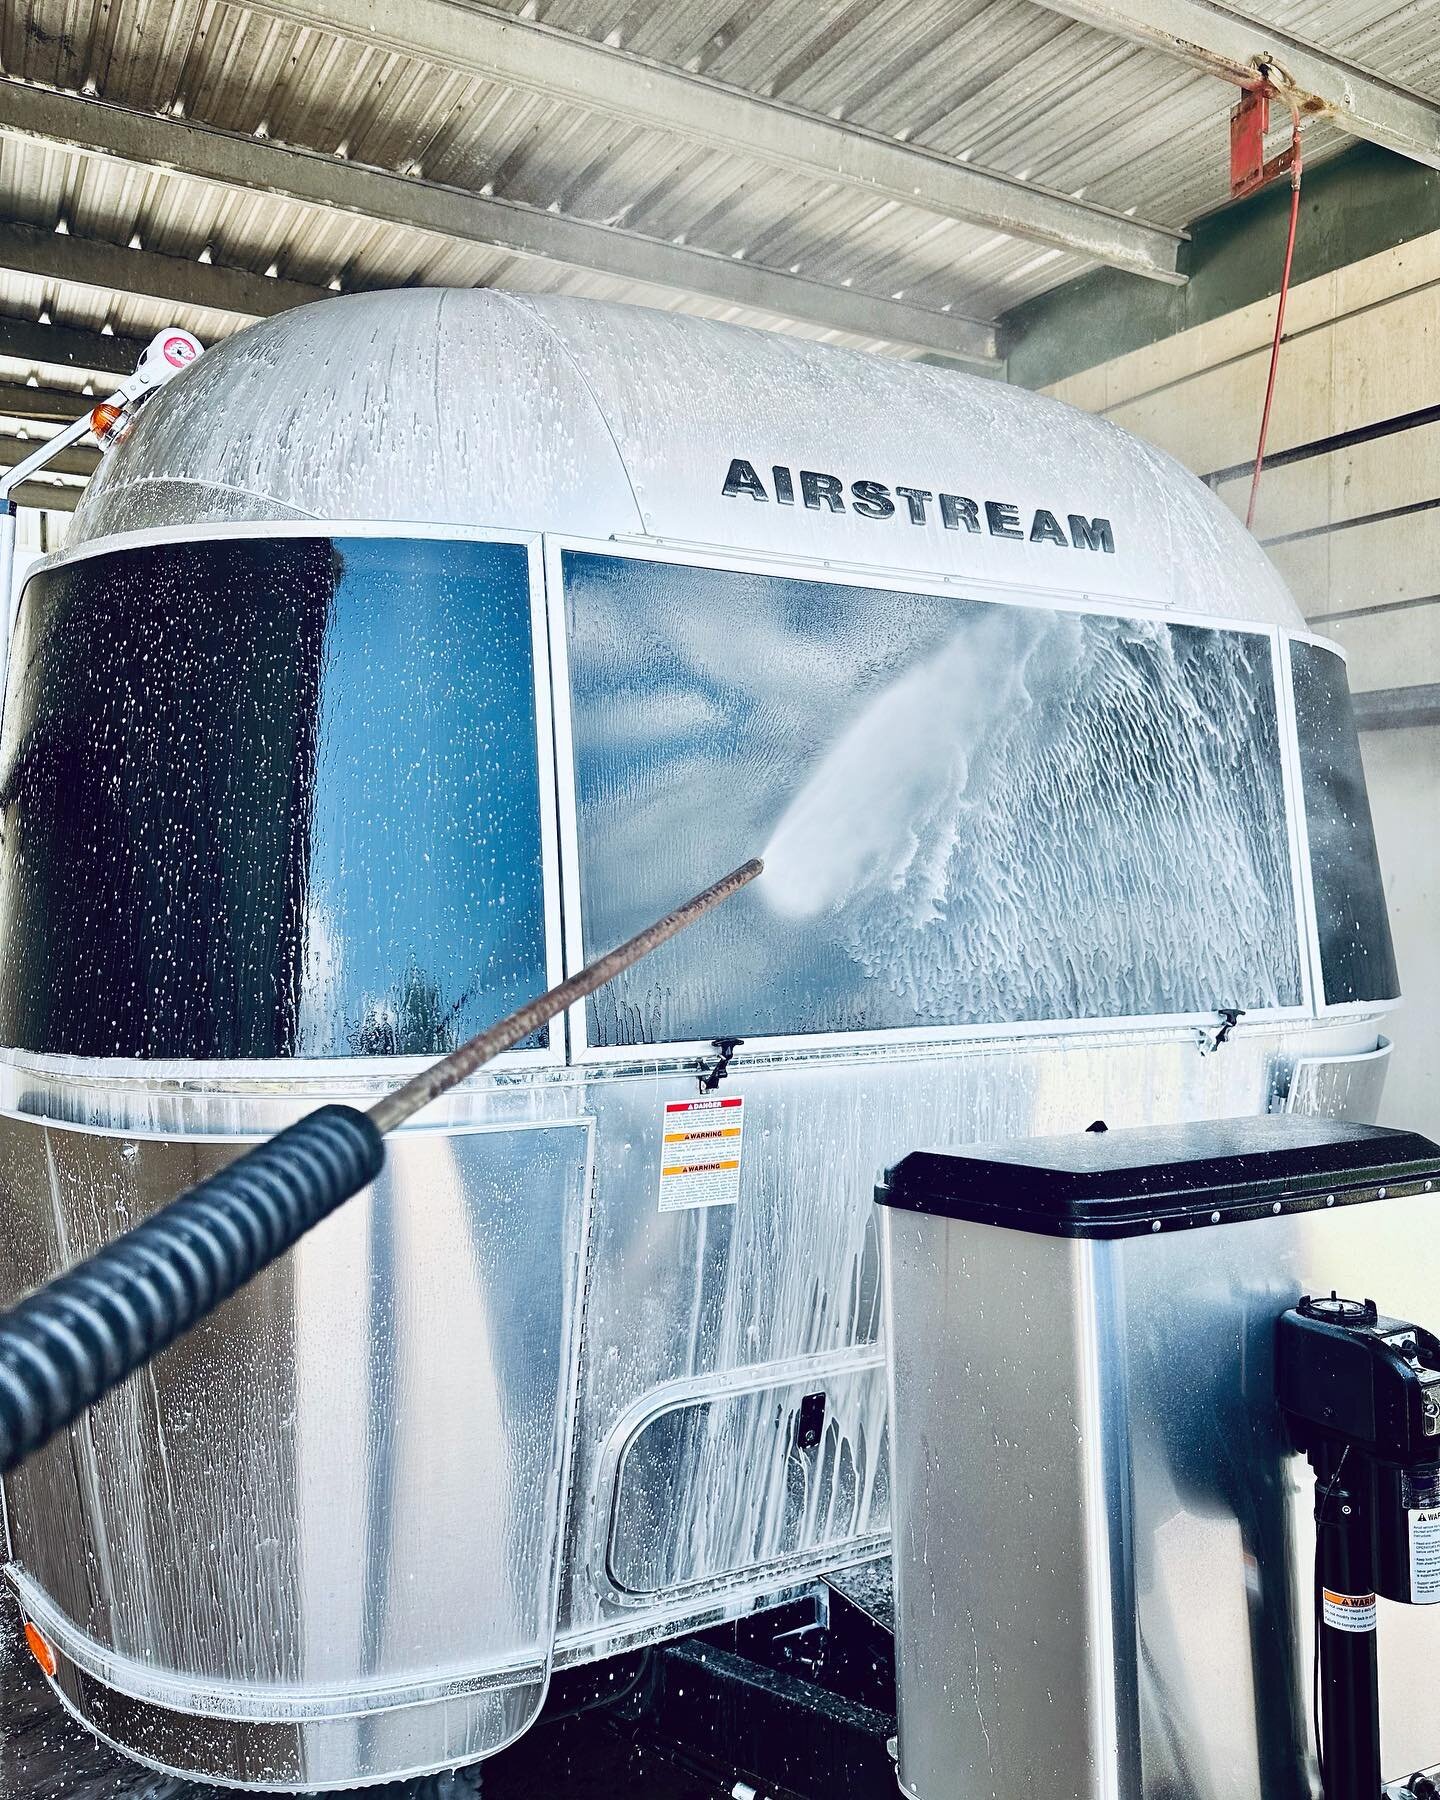 The Airstream got a wash, then took her to @nirvc for annual inspection. The @leisurevans is next!